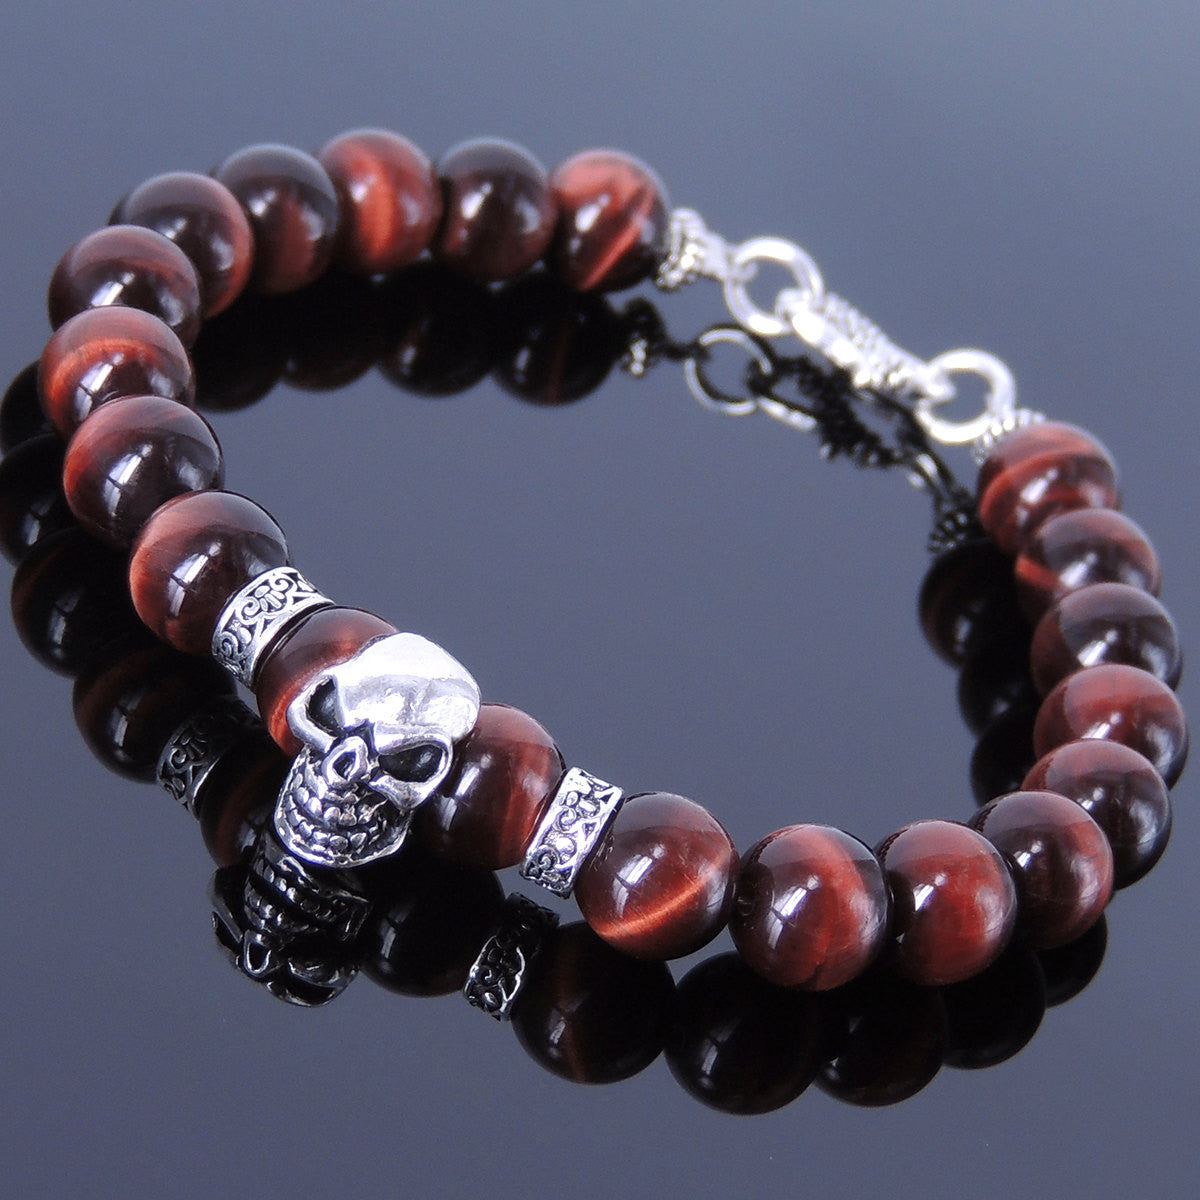 8mm Red Tiger Eye Healing Gemstone Bracelet with S925 Sterling Silver Protection Skull, Celtic Spacer Beads & S-Hook Clasp - Handmade by Gem & Silver BR352